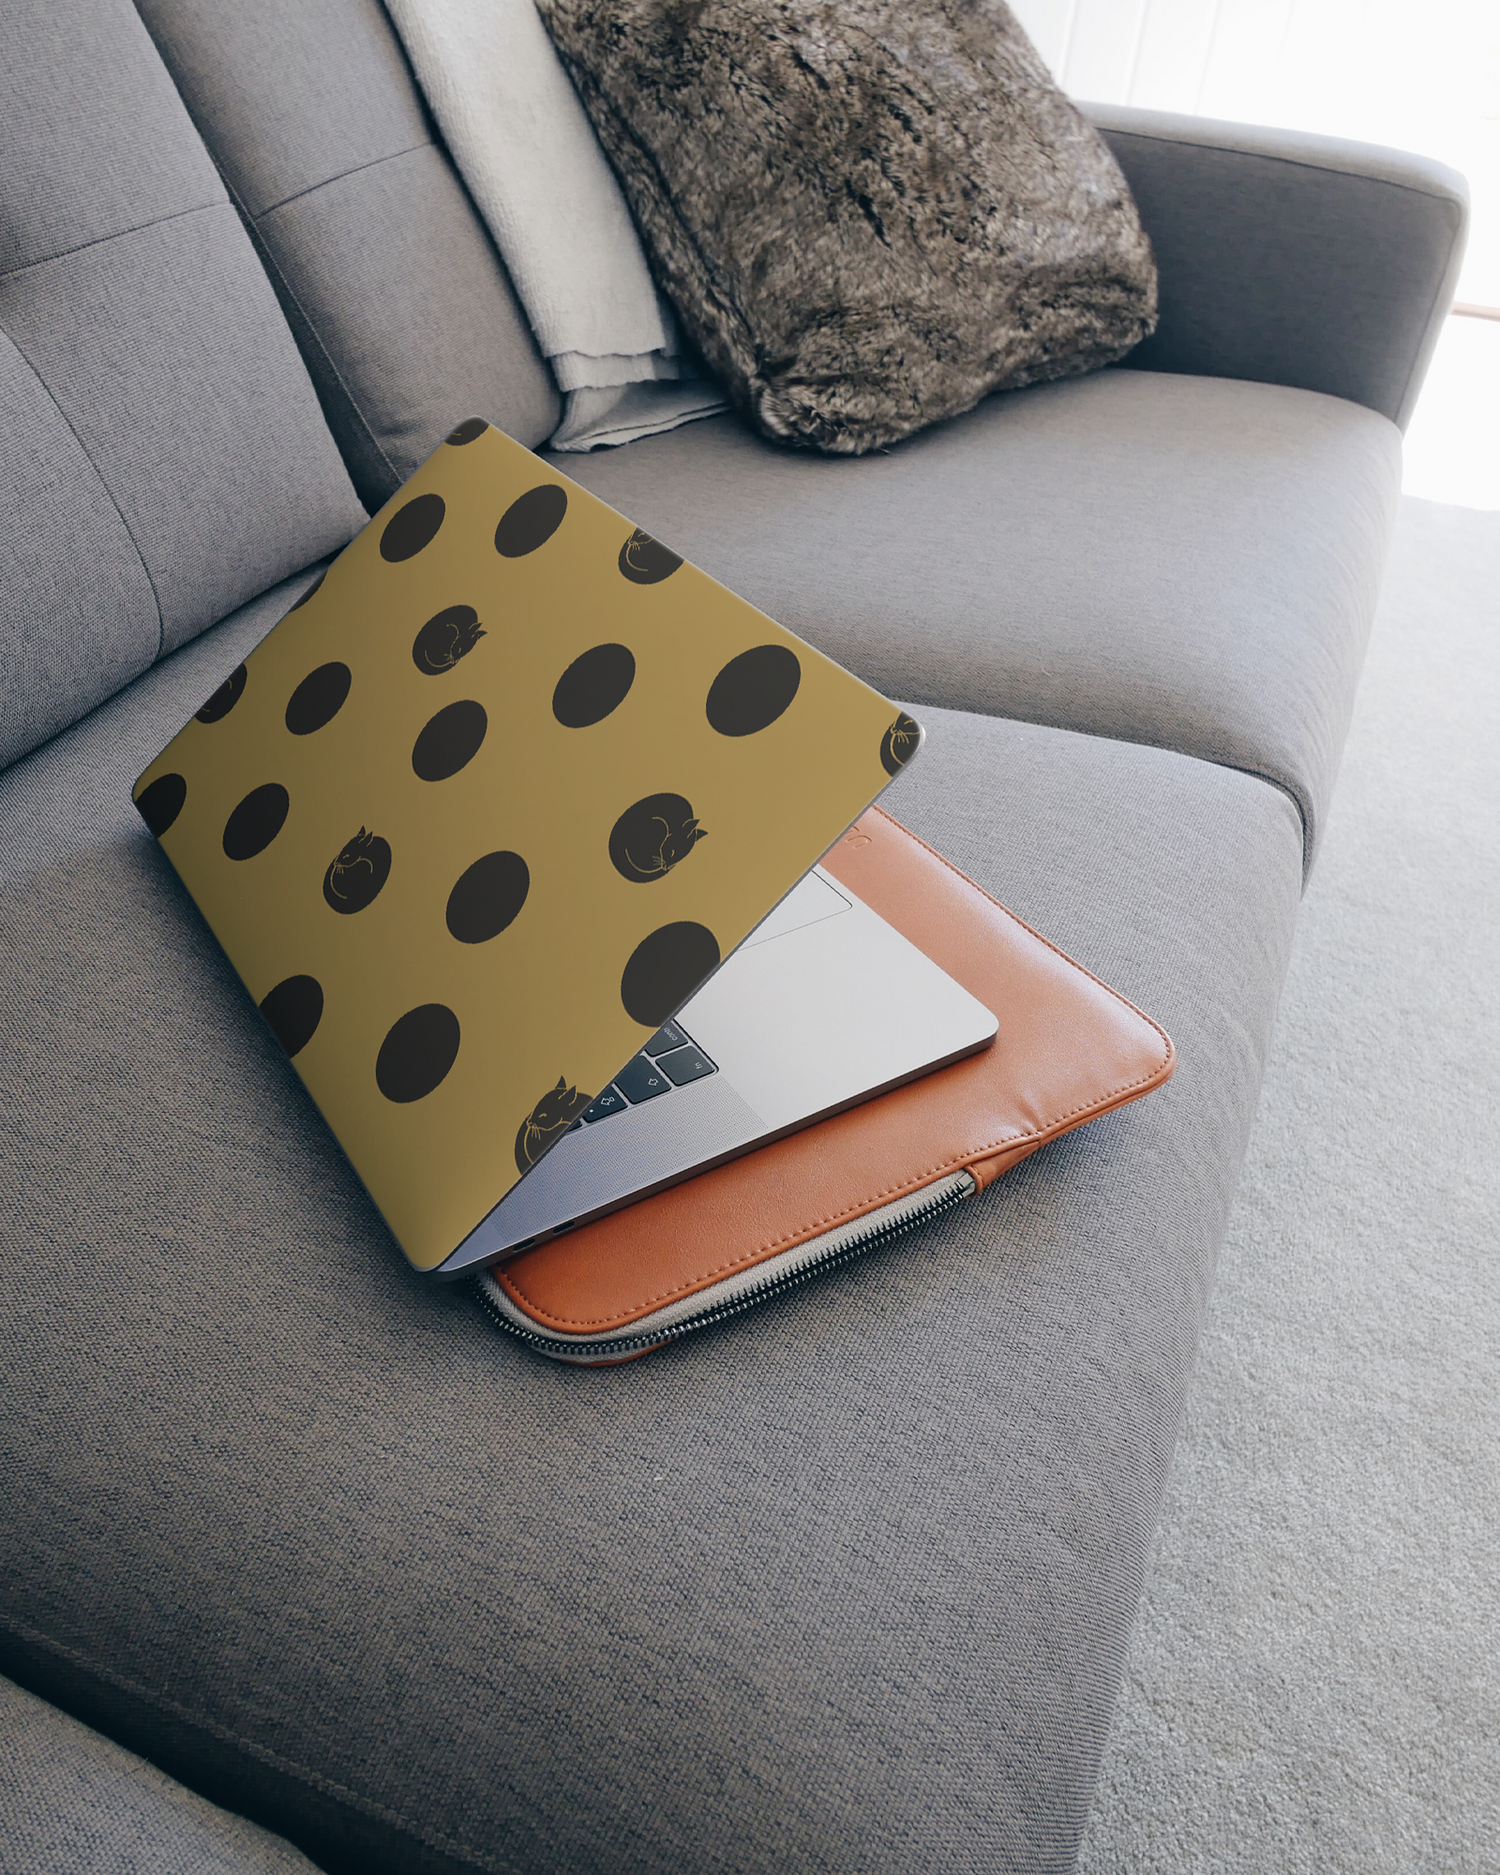 Polka Cats Laptop Skin for 15 inch Apple MacBooks on a couch